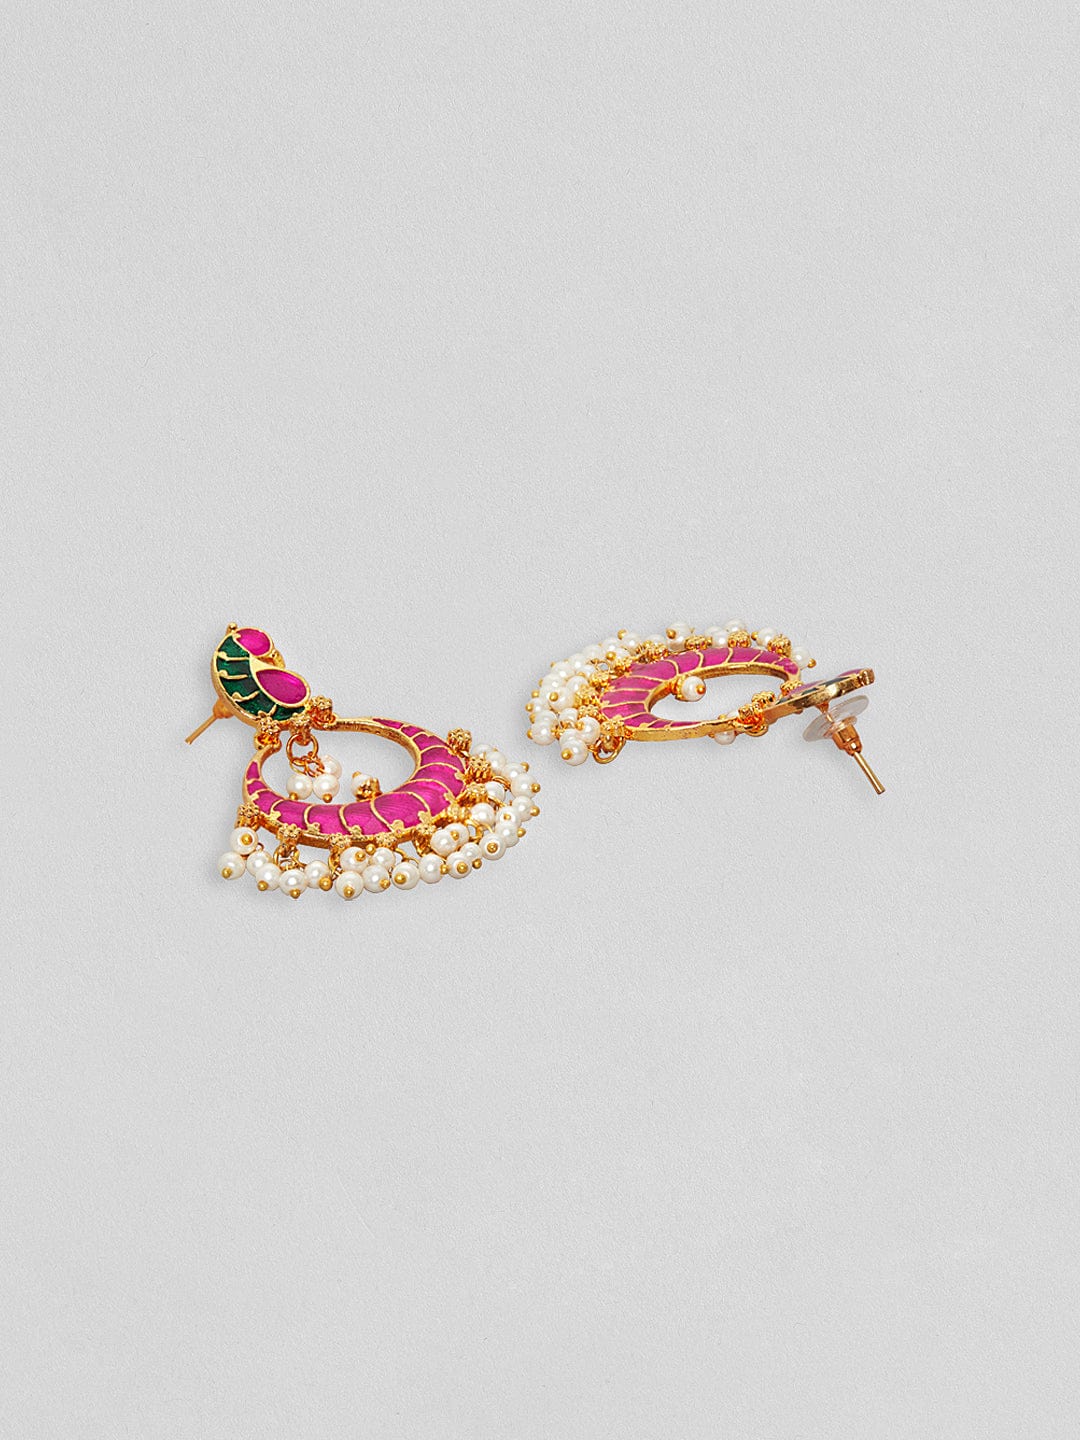 Rubans Gold Plated Pink And Green Enamelled Earrings With Peacock Design Earrings